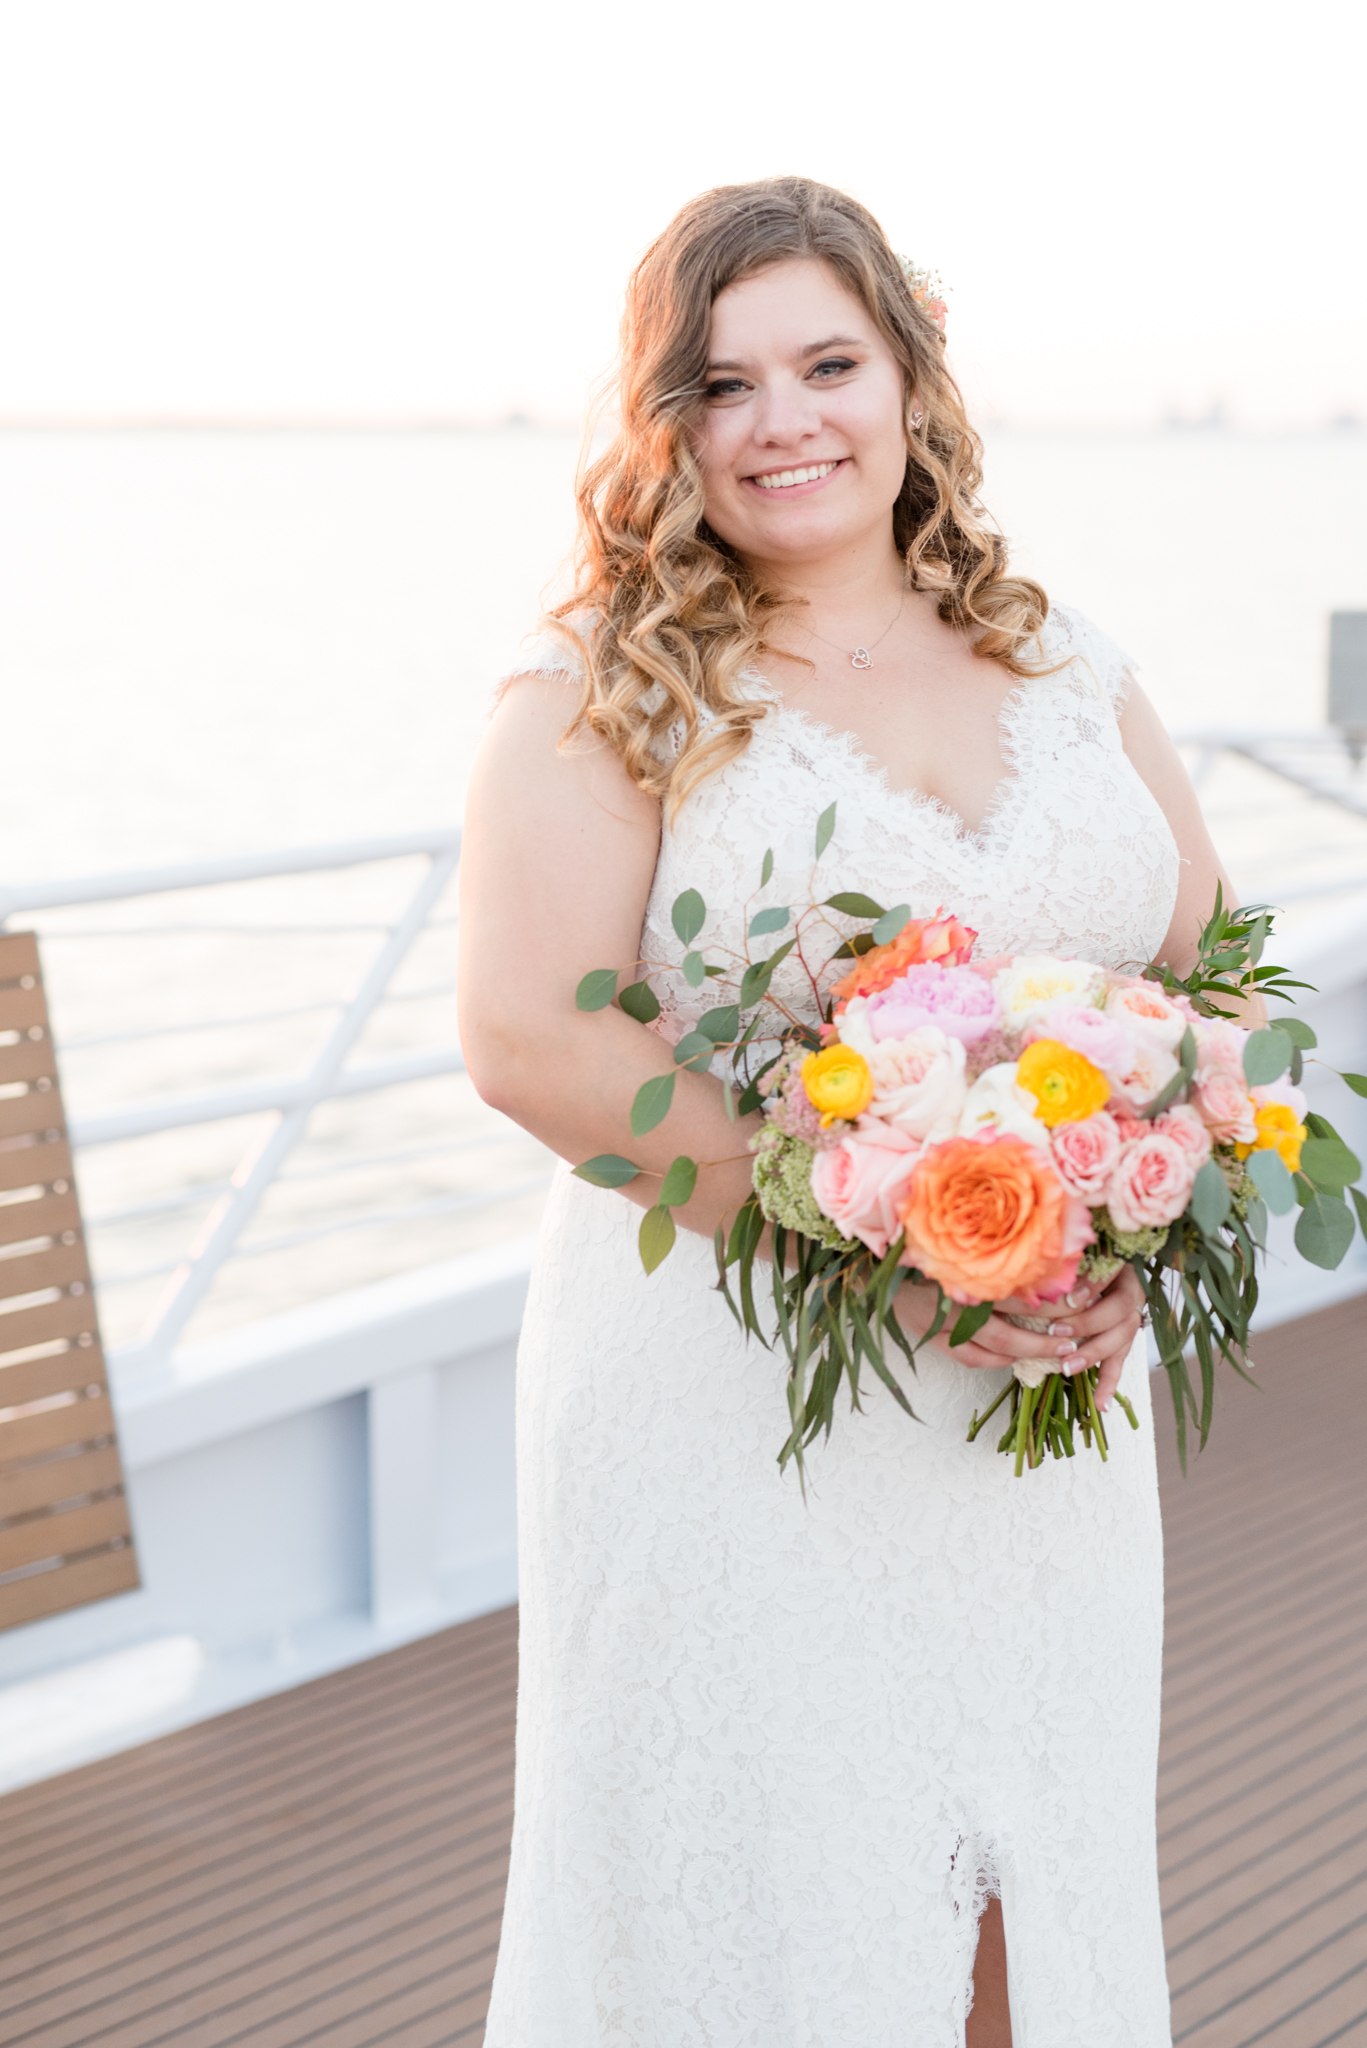 Bride smiles at camera on yacht.